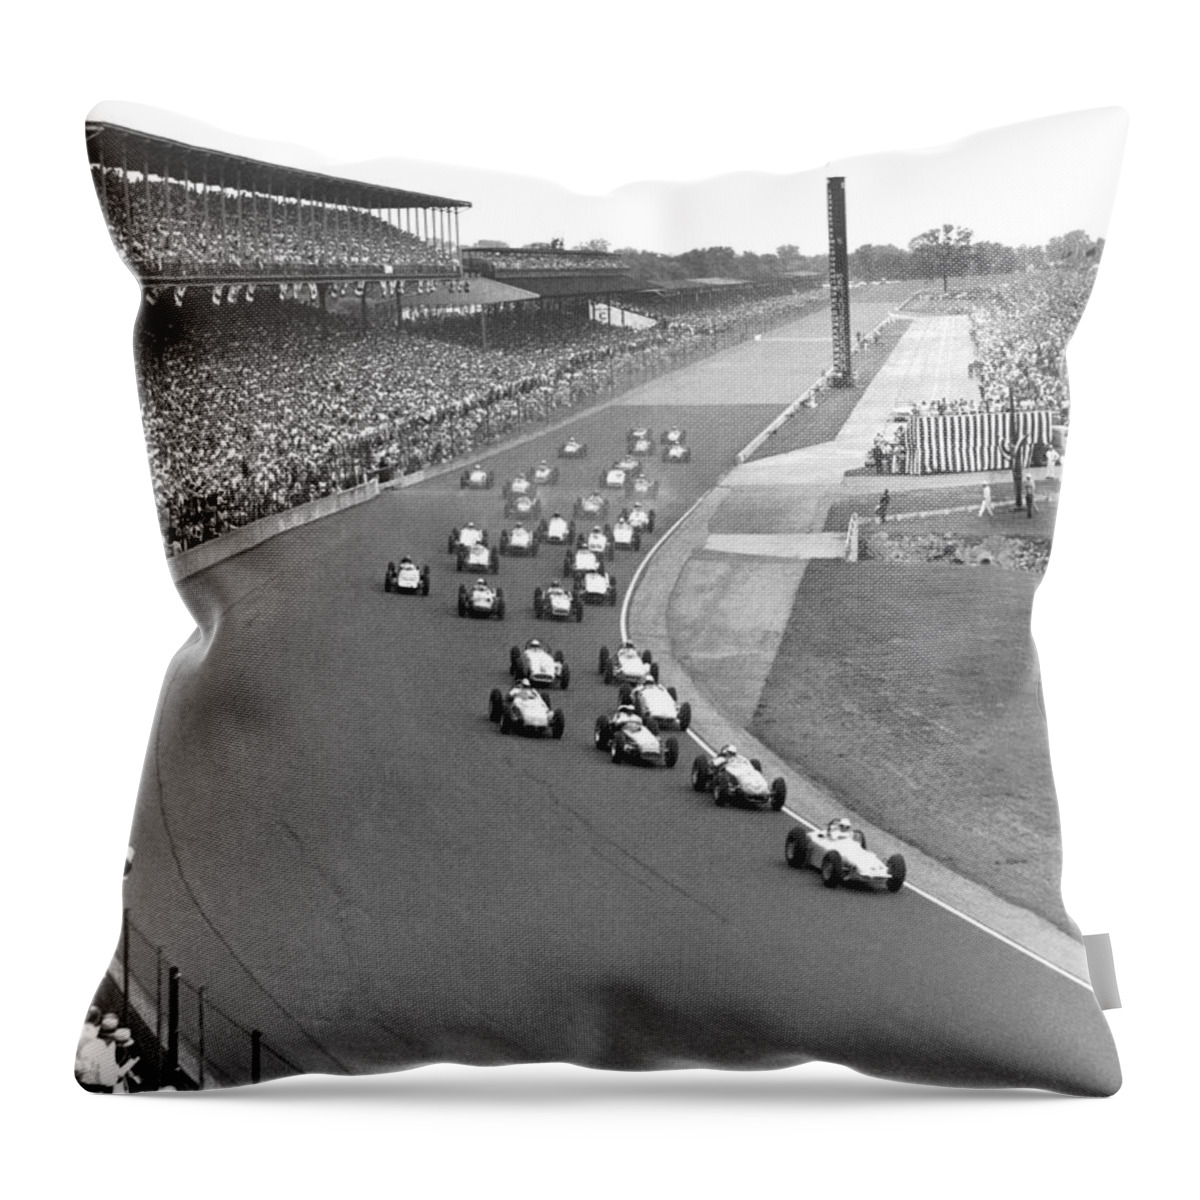 1950's Throw Pillow featuring the photograph Indy 500 Race Start by Underwood Archives